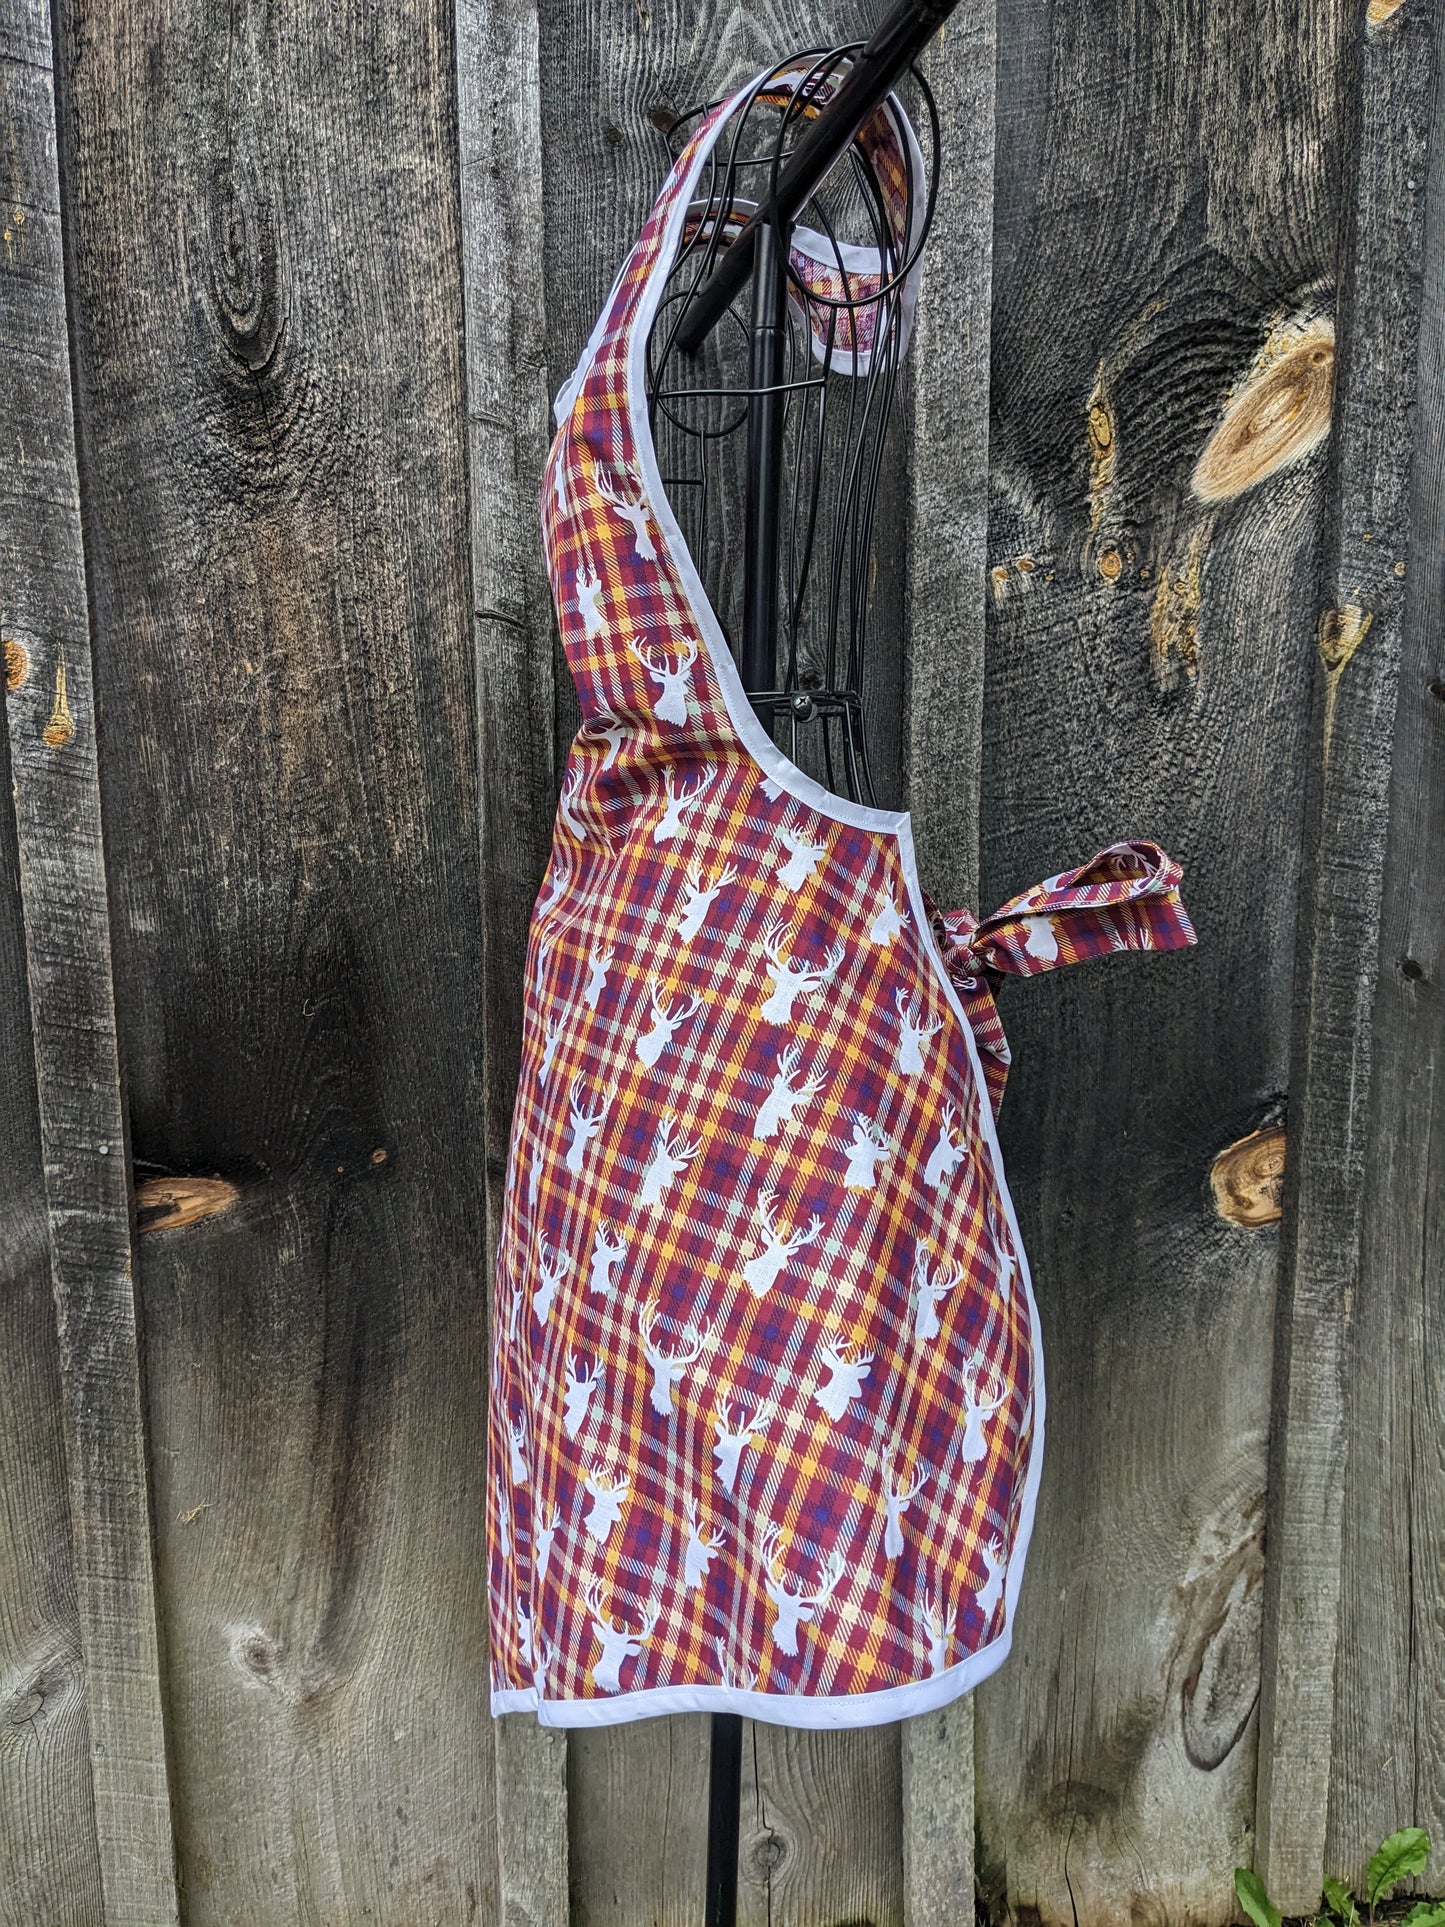 Stag's Head and Plaid Vintage Inspired Apron